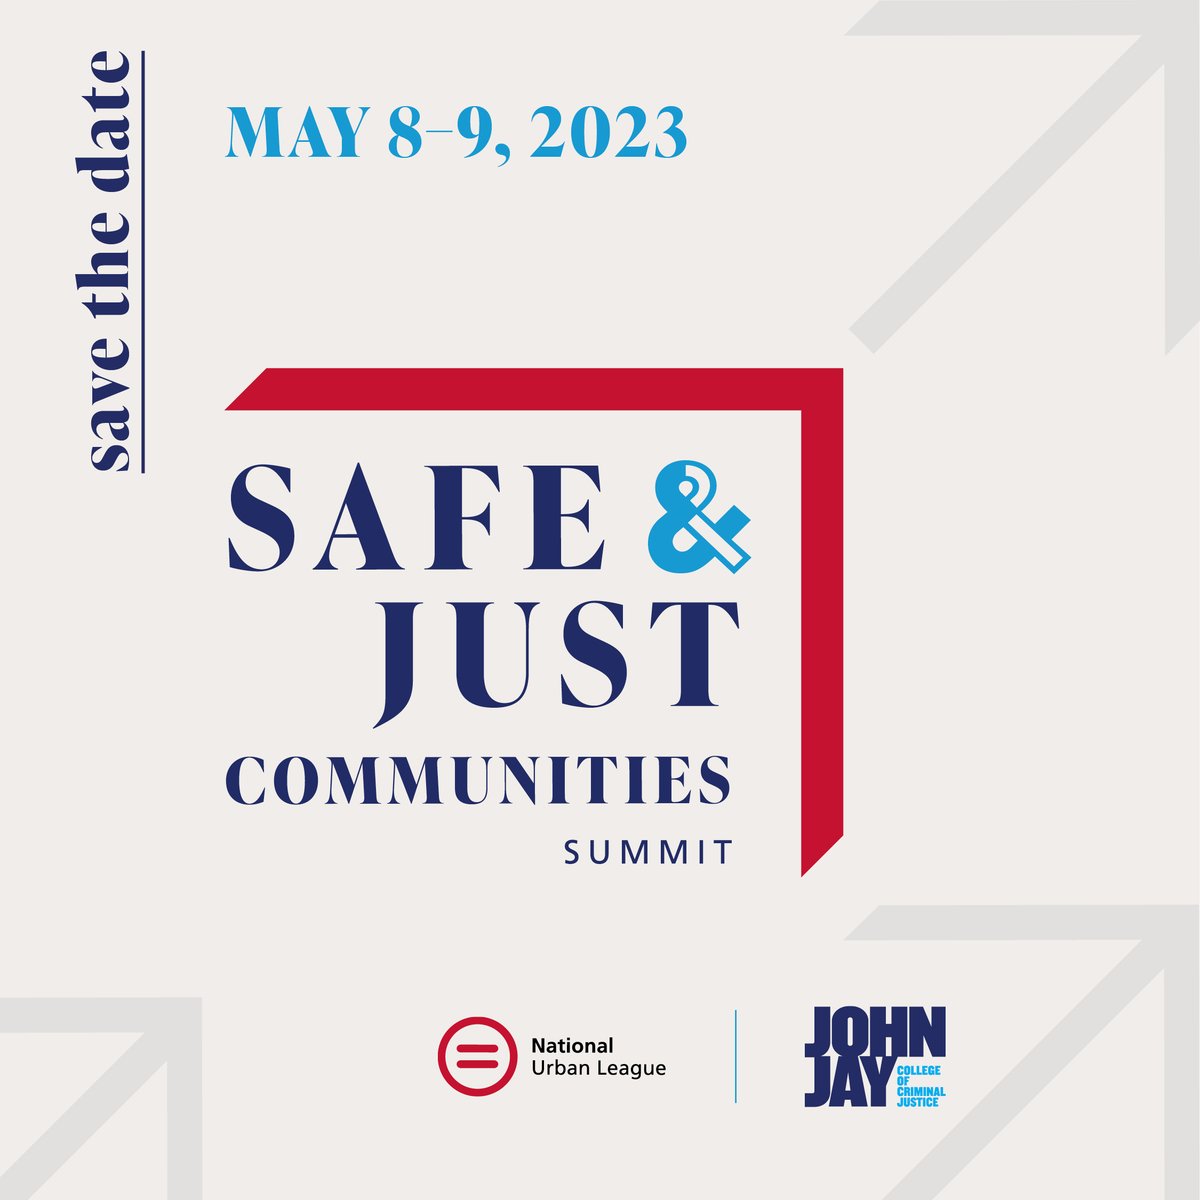 What do safe and just communities truly look like? And how do we create and support them? Join us at the Safe & Just Communities Summit on May 8-9, hosted by @NatUrbanLeague & @JohnJayFPS

Learn more and register here: bit.ly/SafeAndJustSum…  #SafeandJust